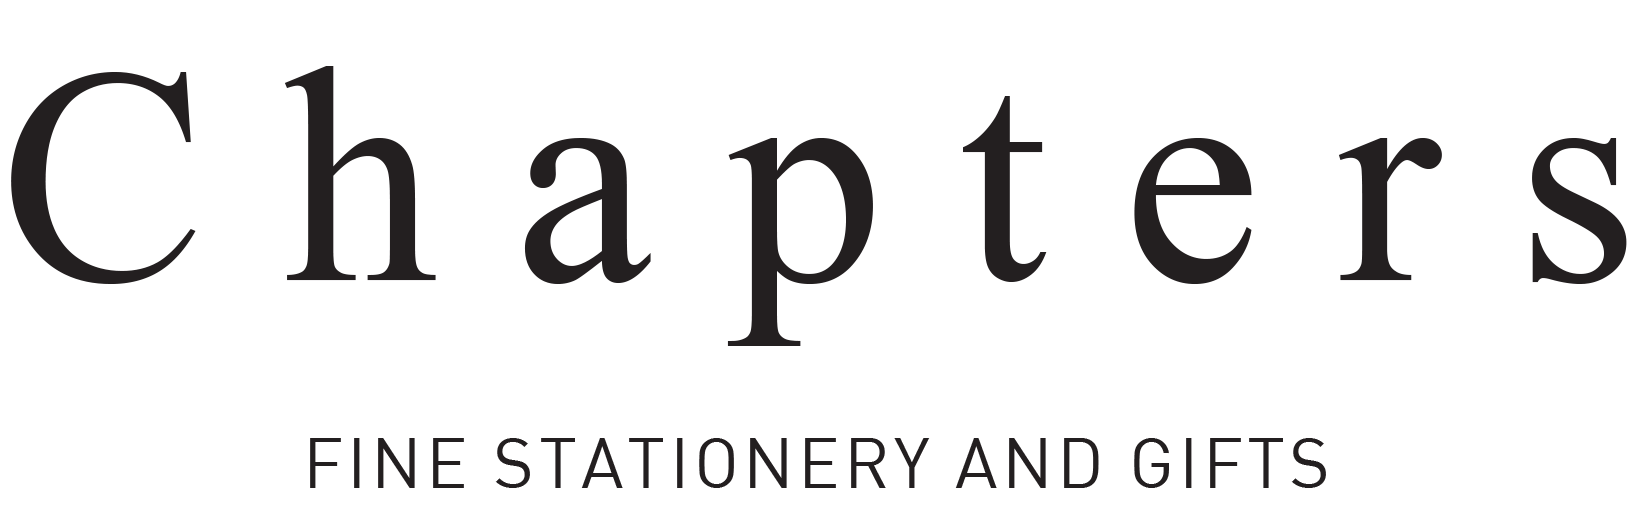 Chapters Logo